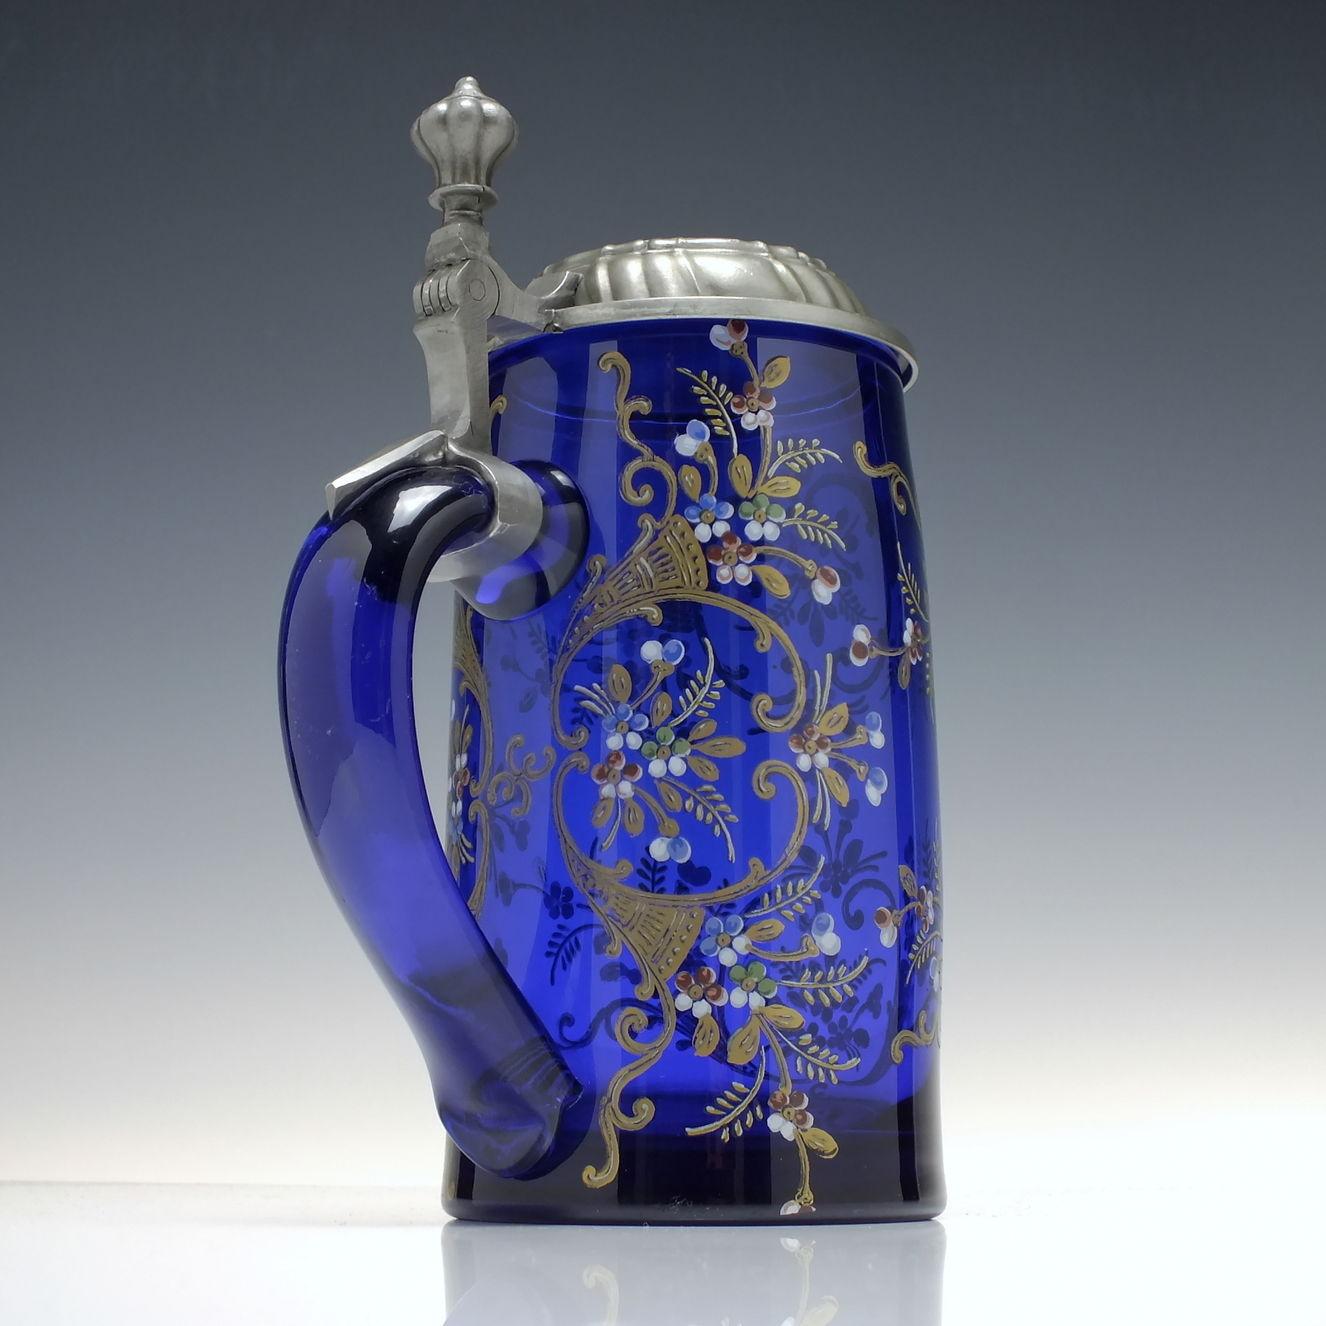 Blown Glass Moser Enamelled and Gilded 19th Century Blue Glass Beer Stein c1880